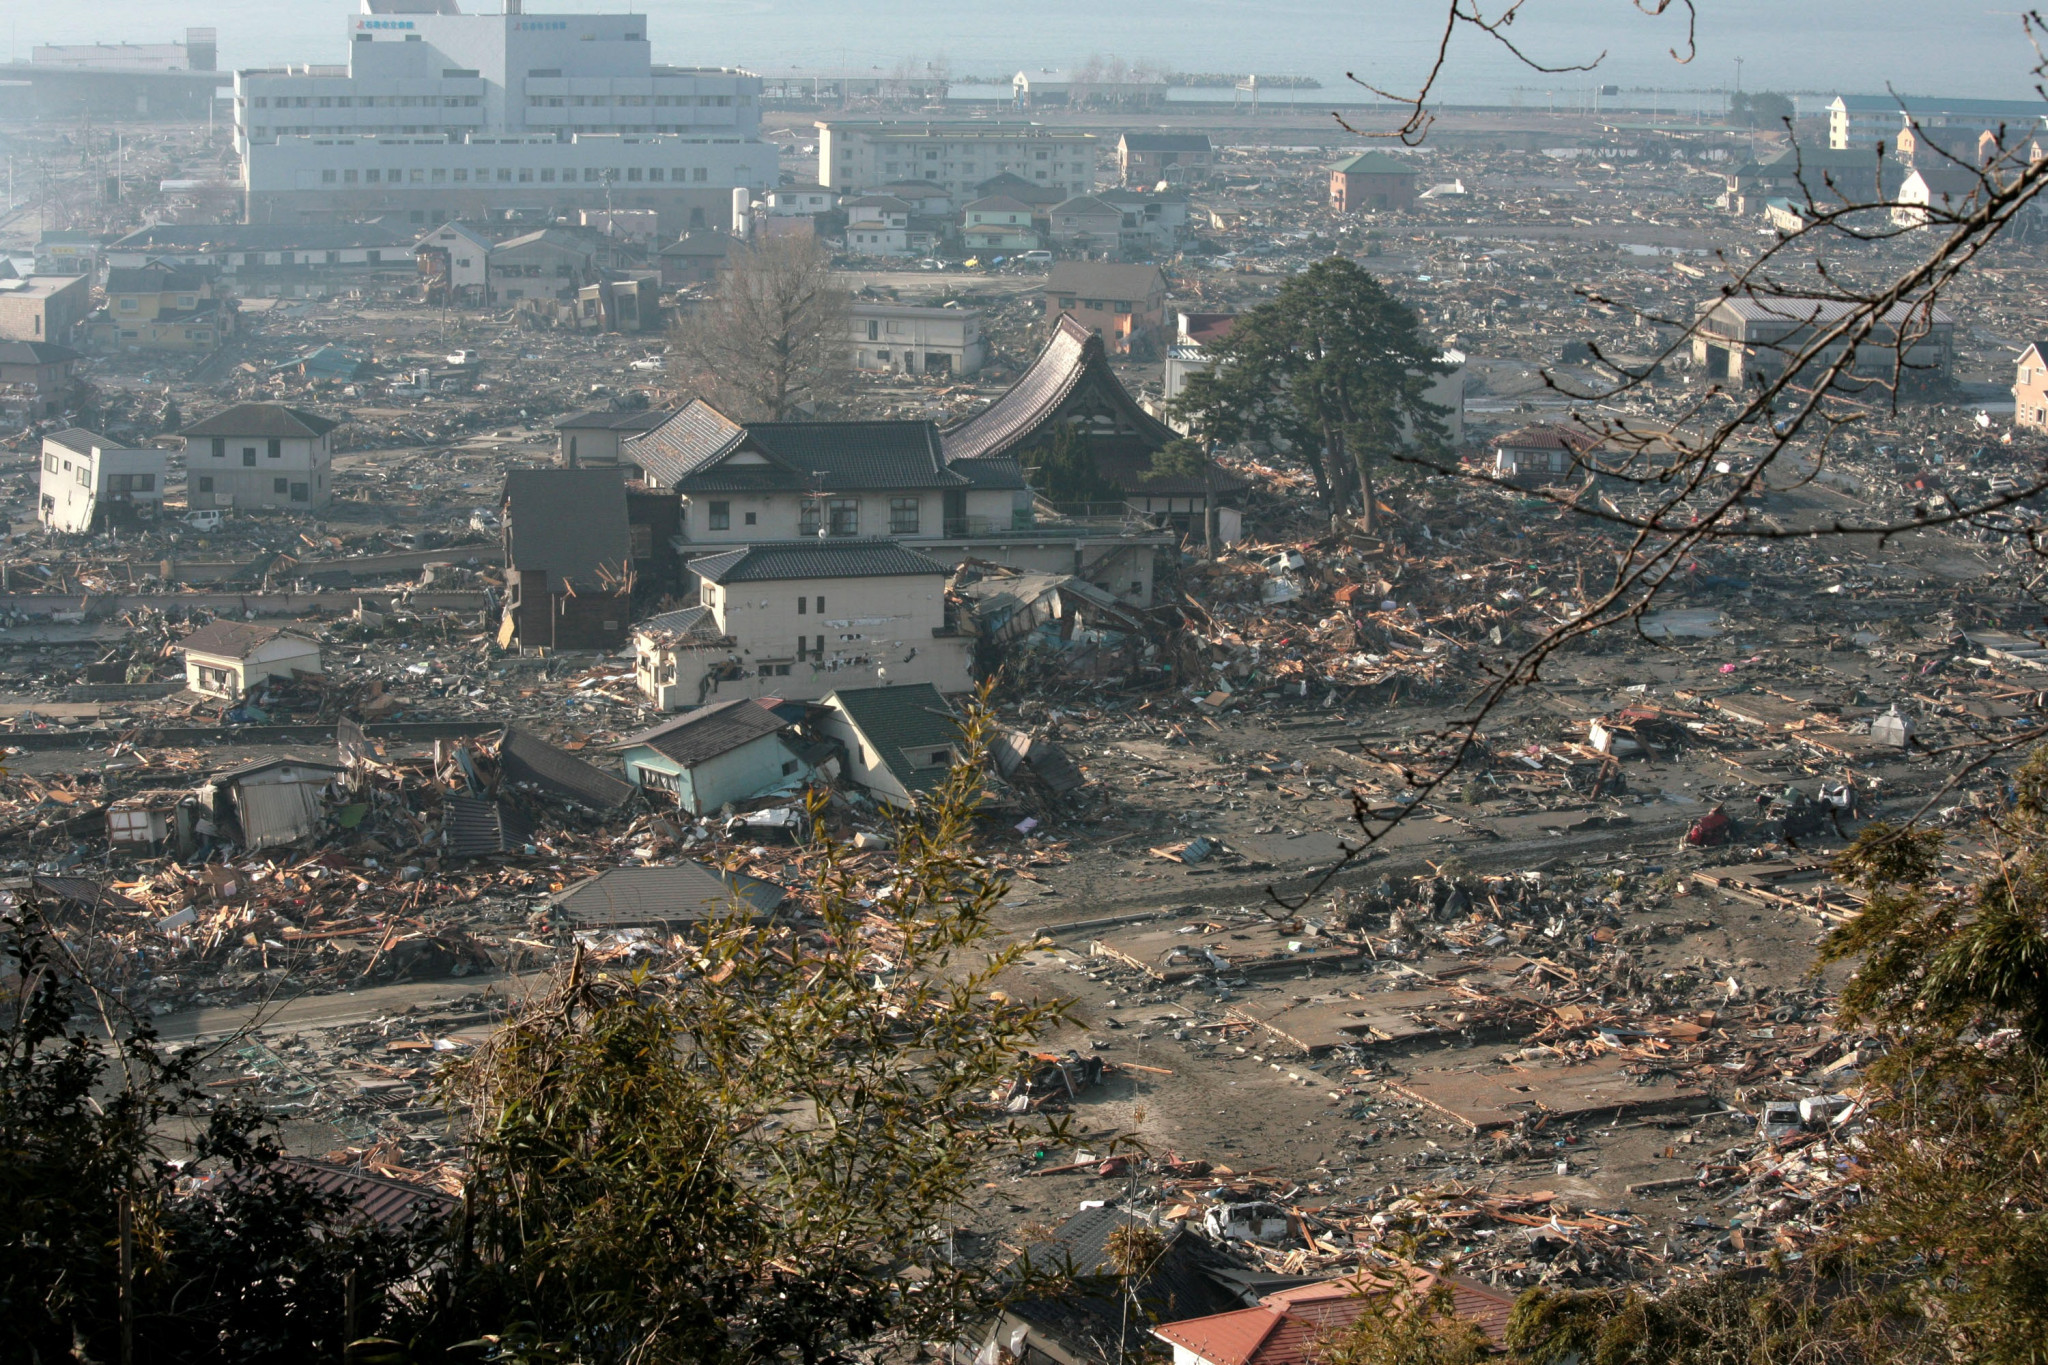 Fukushima has been undergoing regeneration following the destructive Great East Japan Earthquake in 2011 ©Getty Images